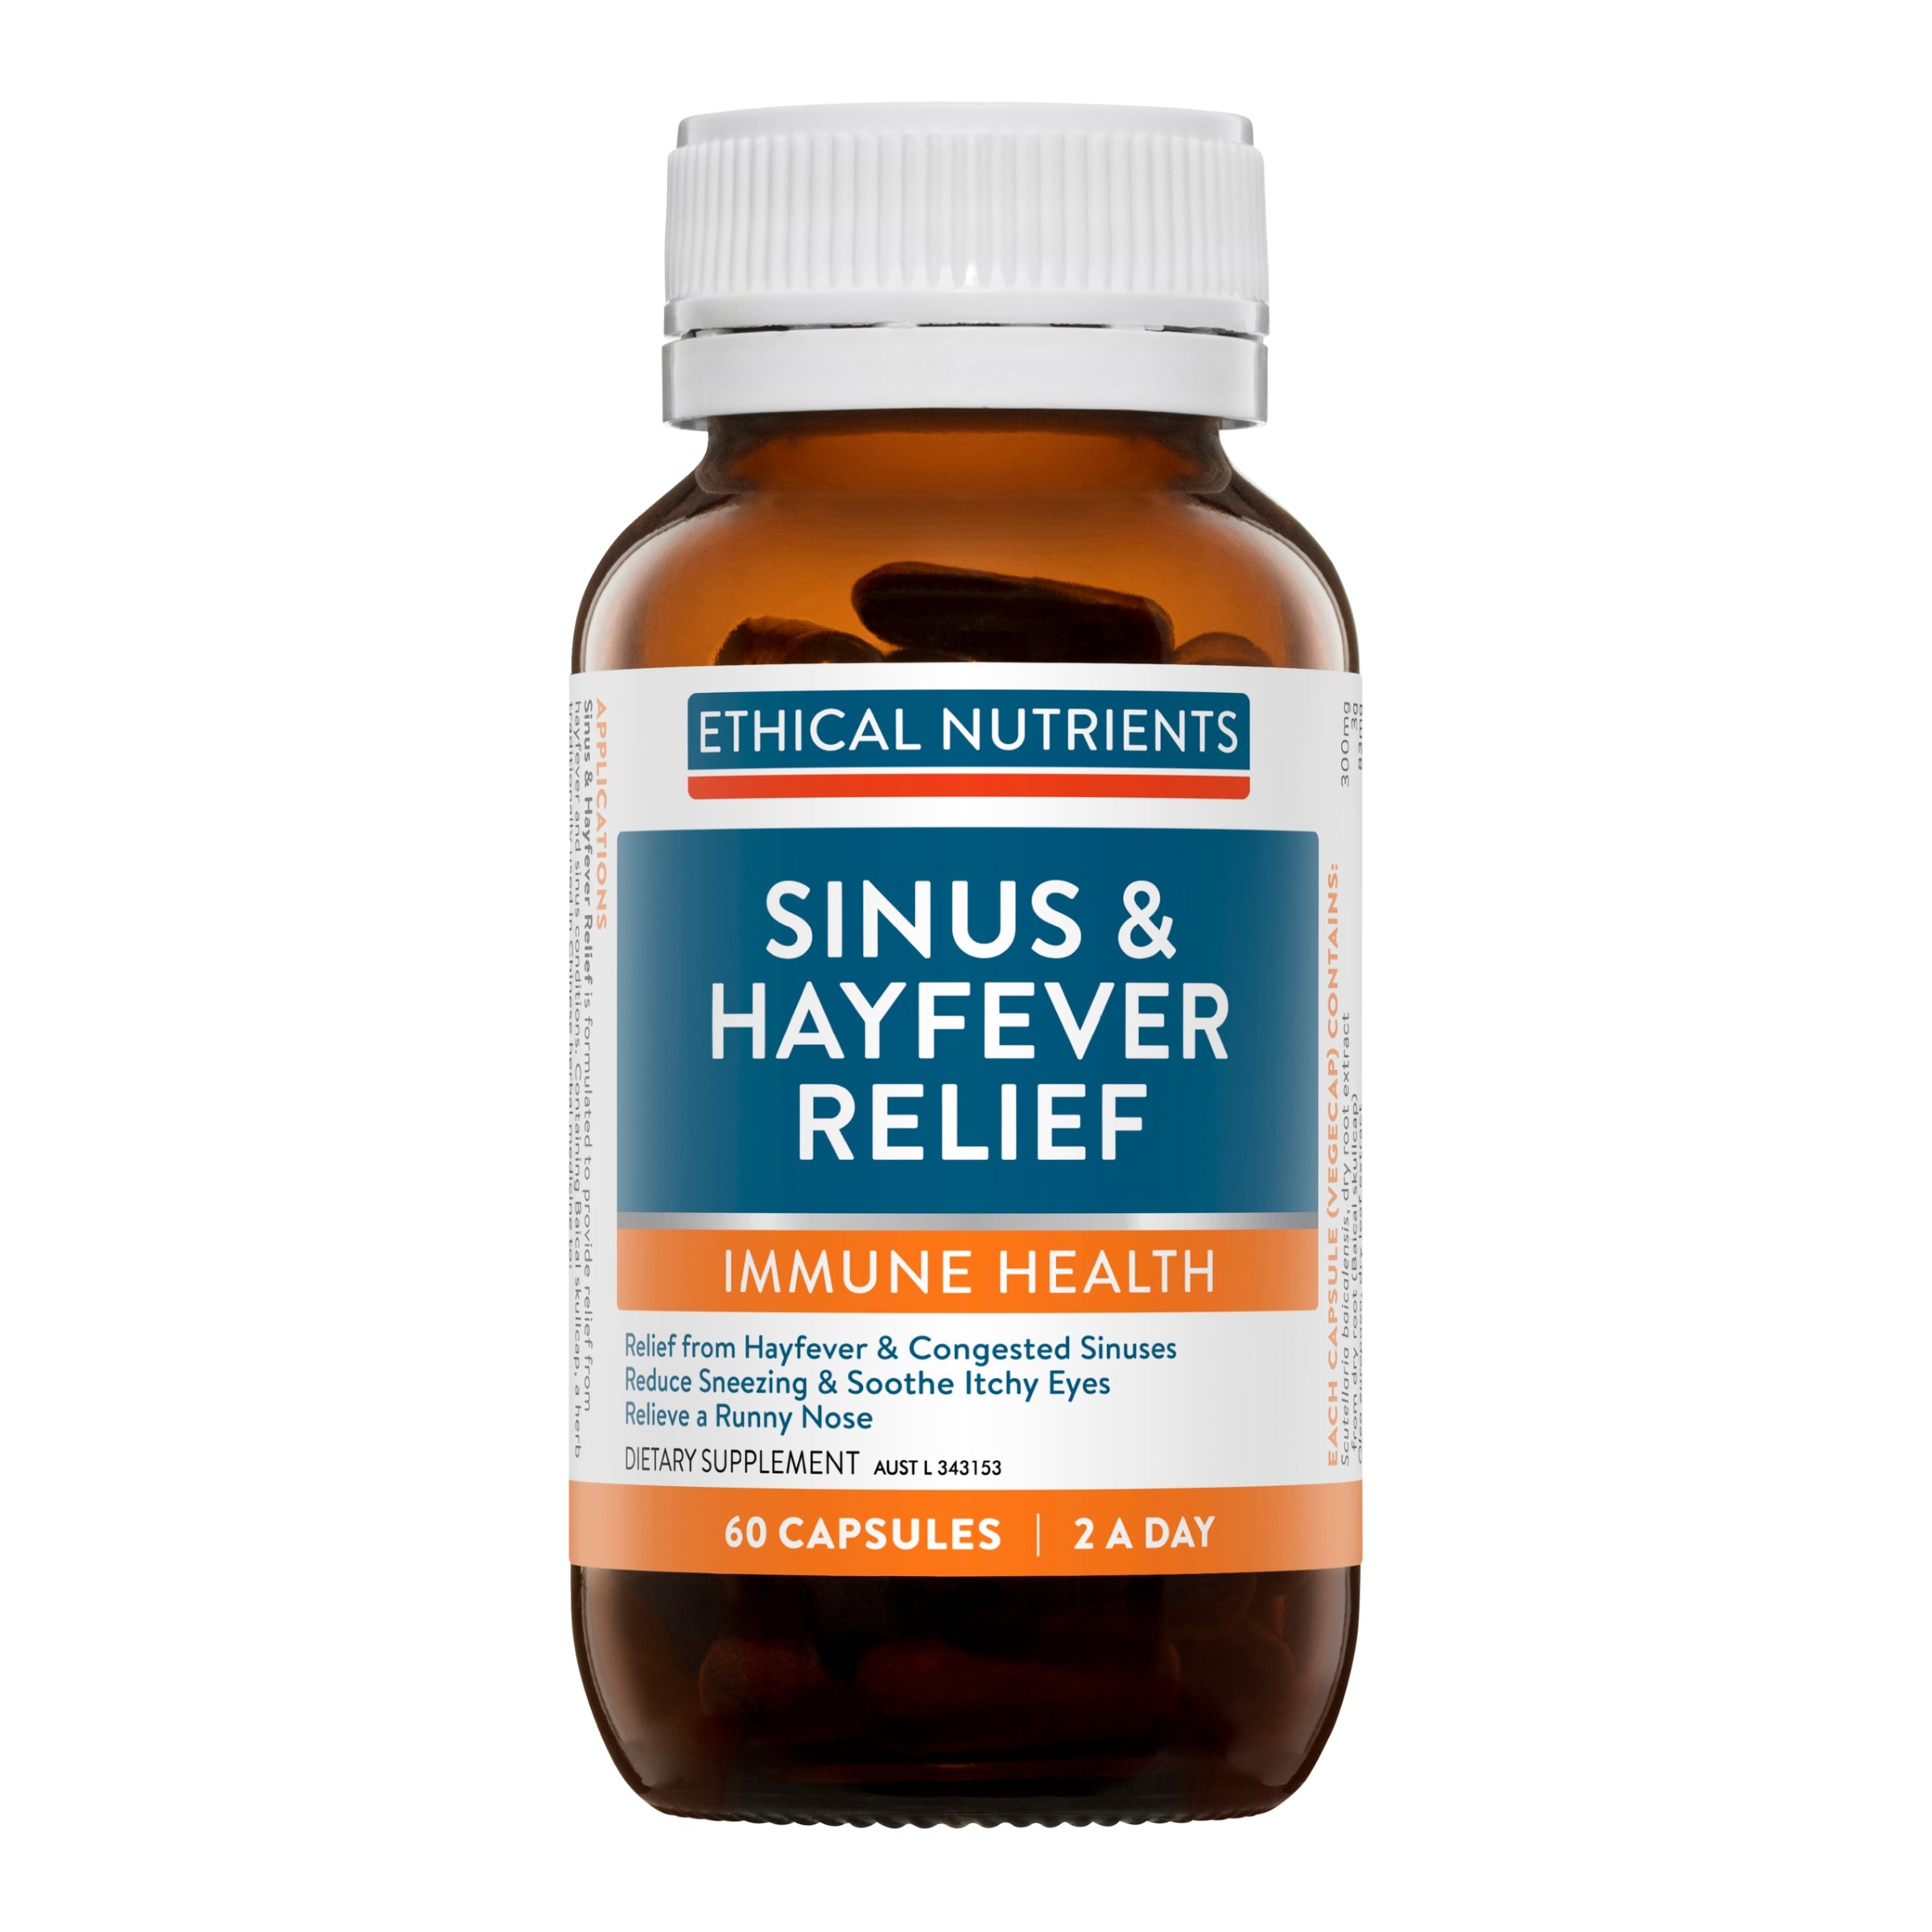 Ethical Nutrients Sinus & Hayfever Relief 60 Capsules #size_60 capsules